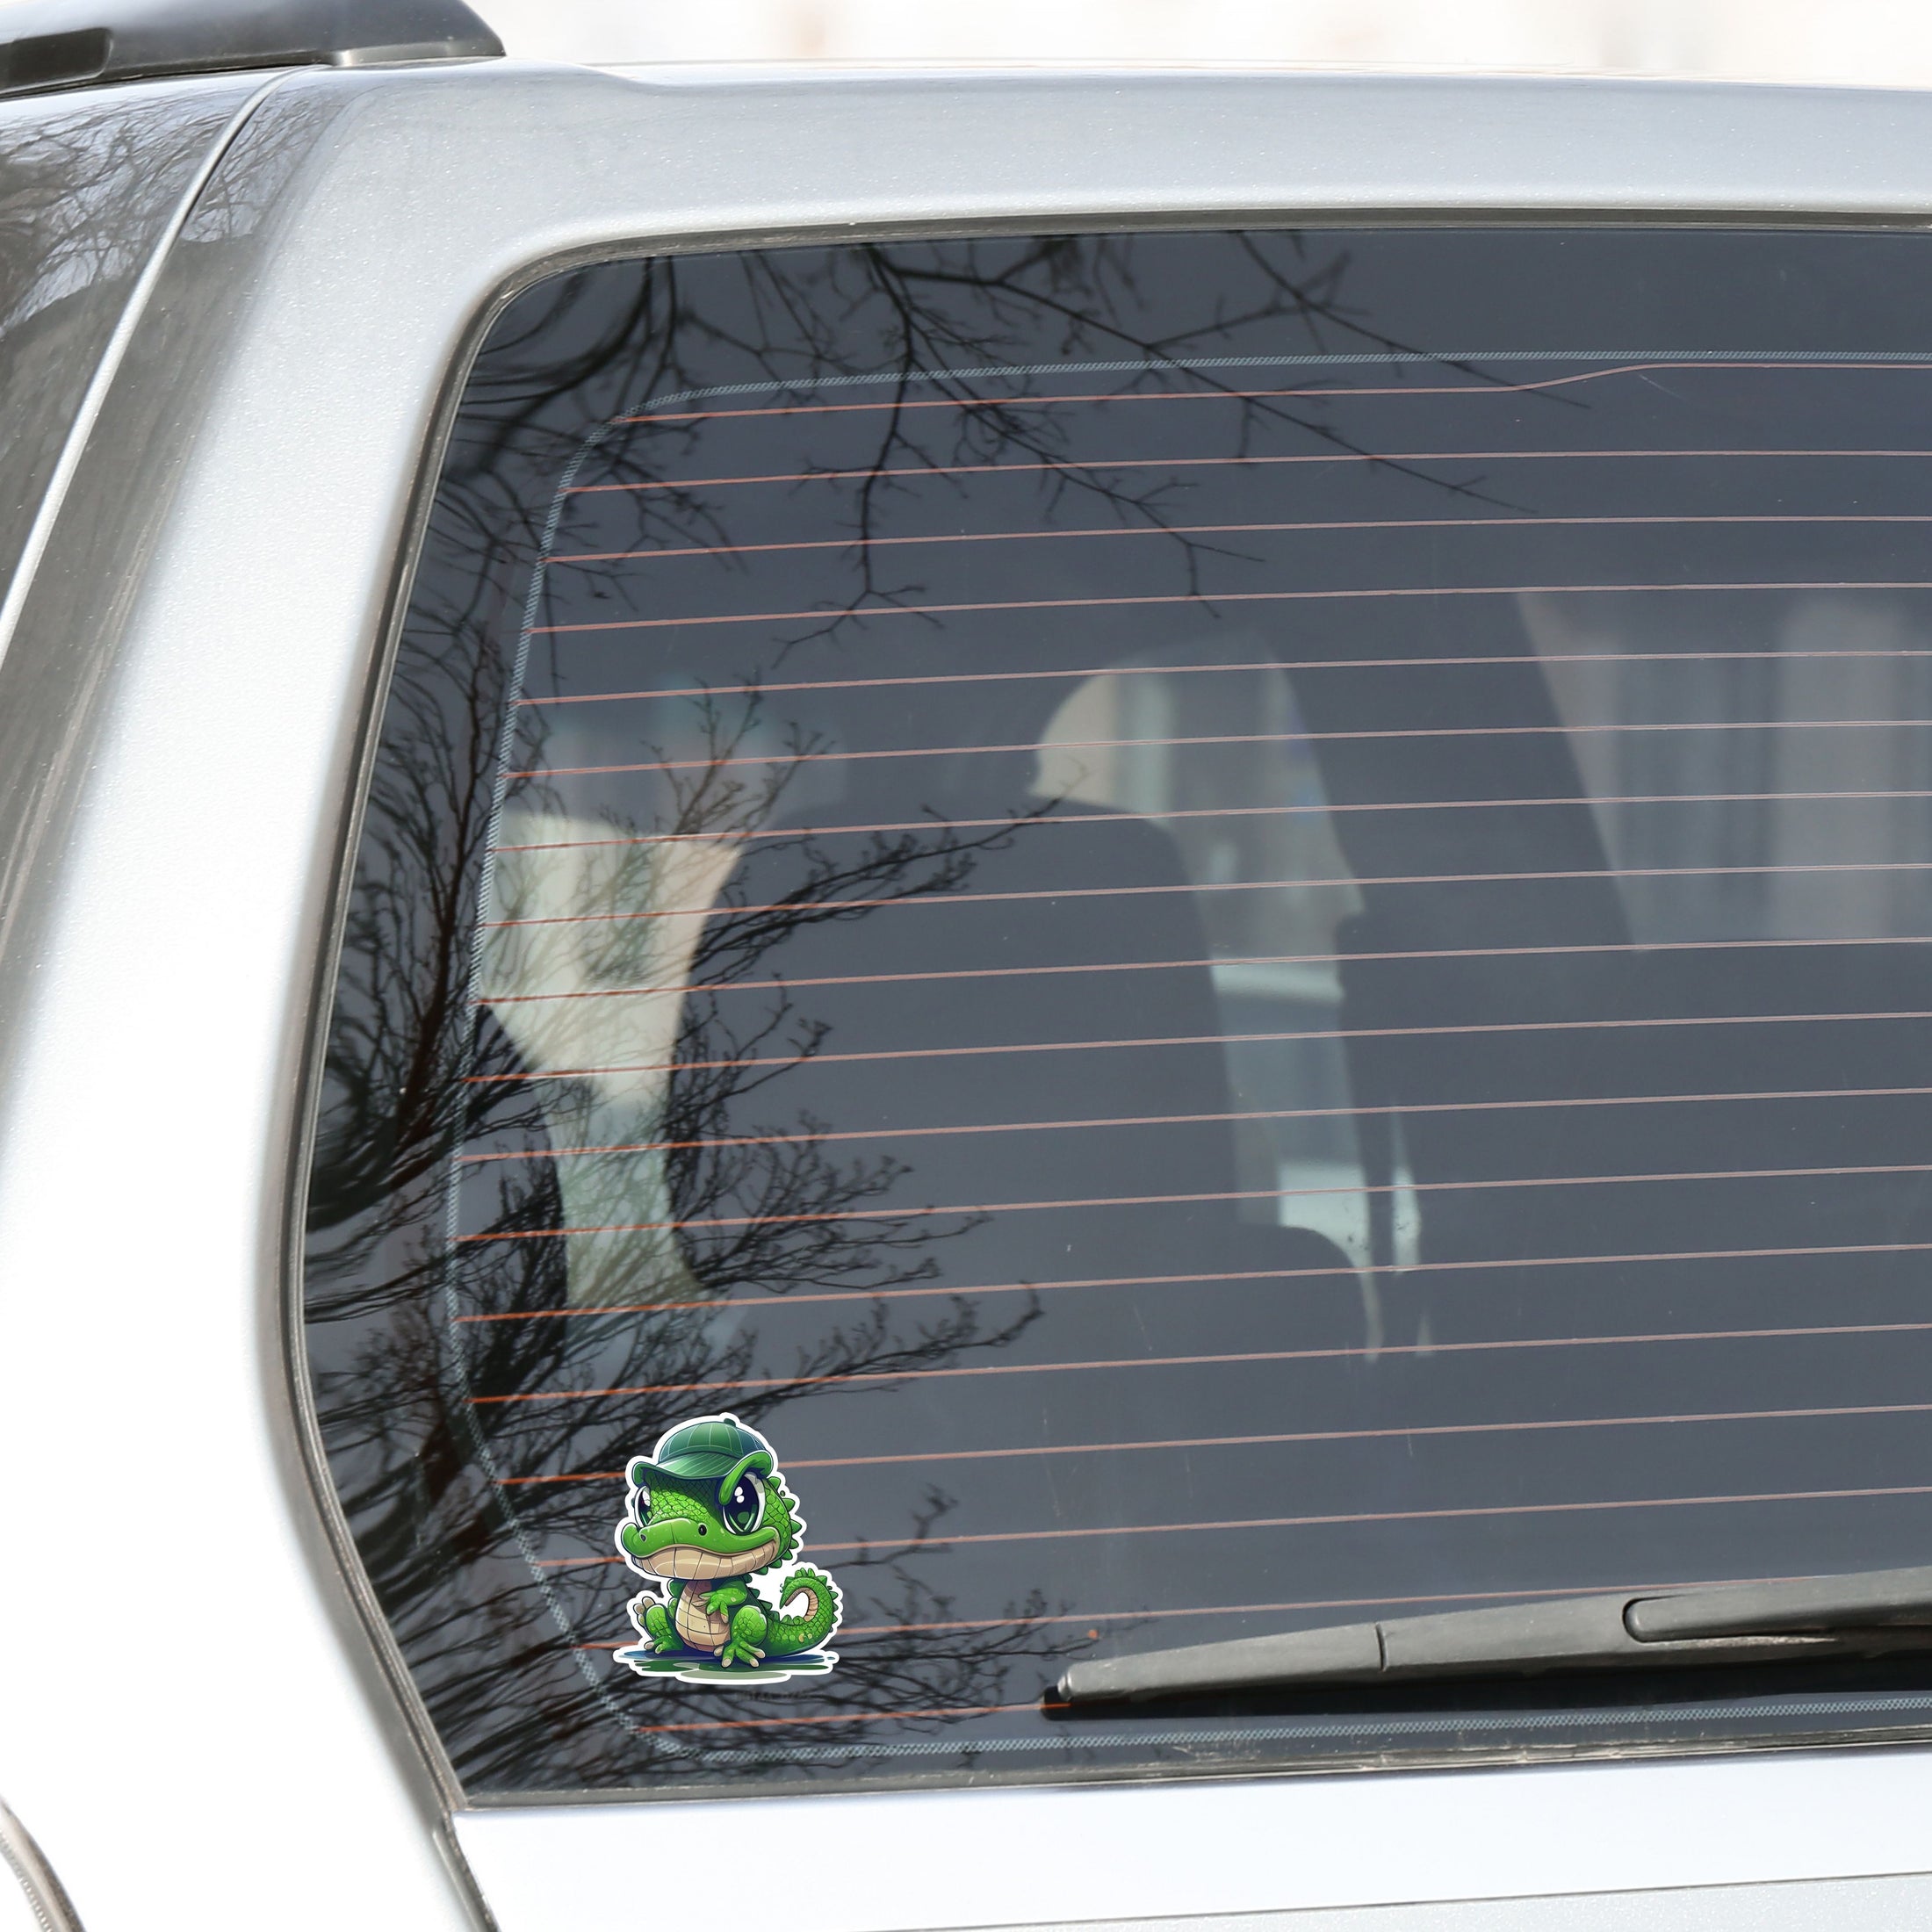 This image shows the crocodile wearing hat sticker on the back window of a car.